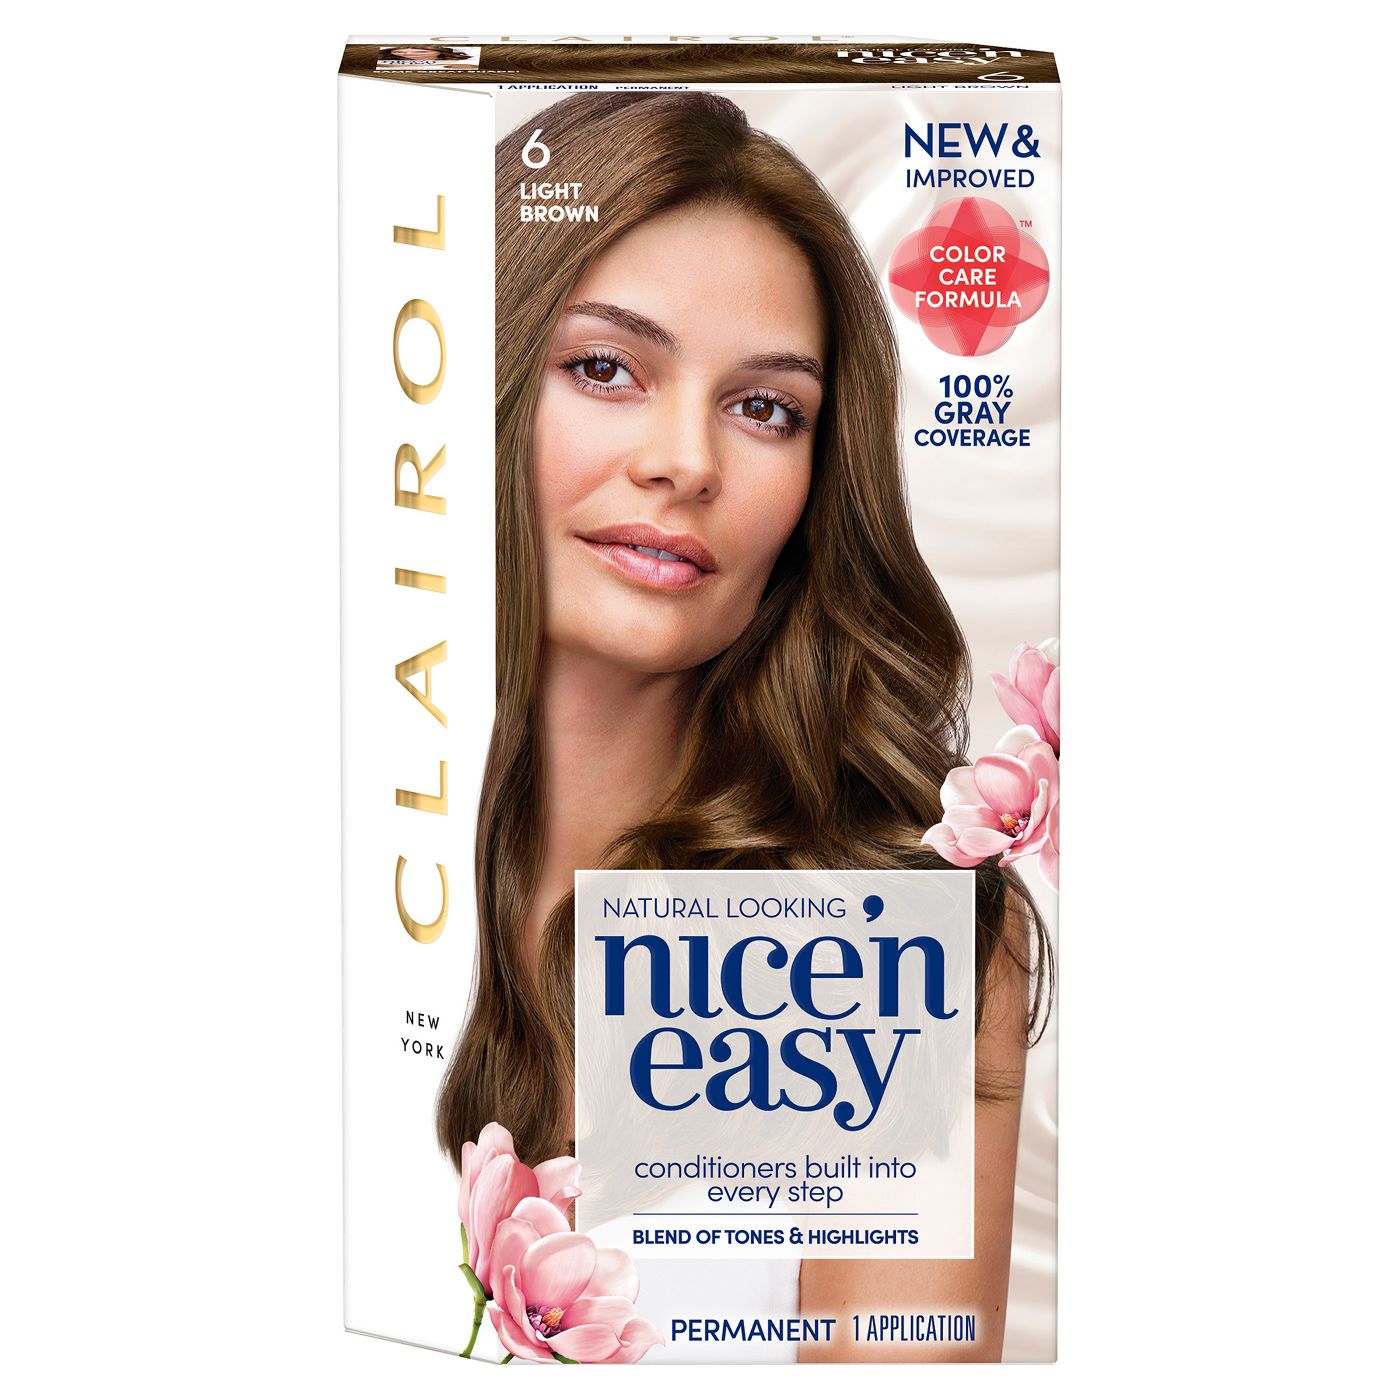 NEED TO COLOR YOUR HAIR, USE THIS 5 OFF 2 CLAIROL COUPON AND SAVE